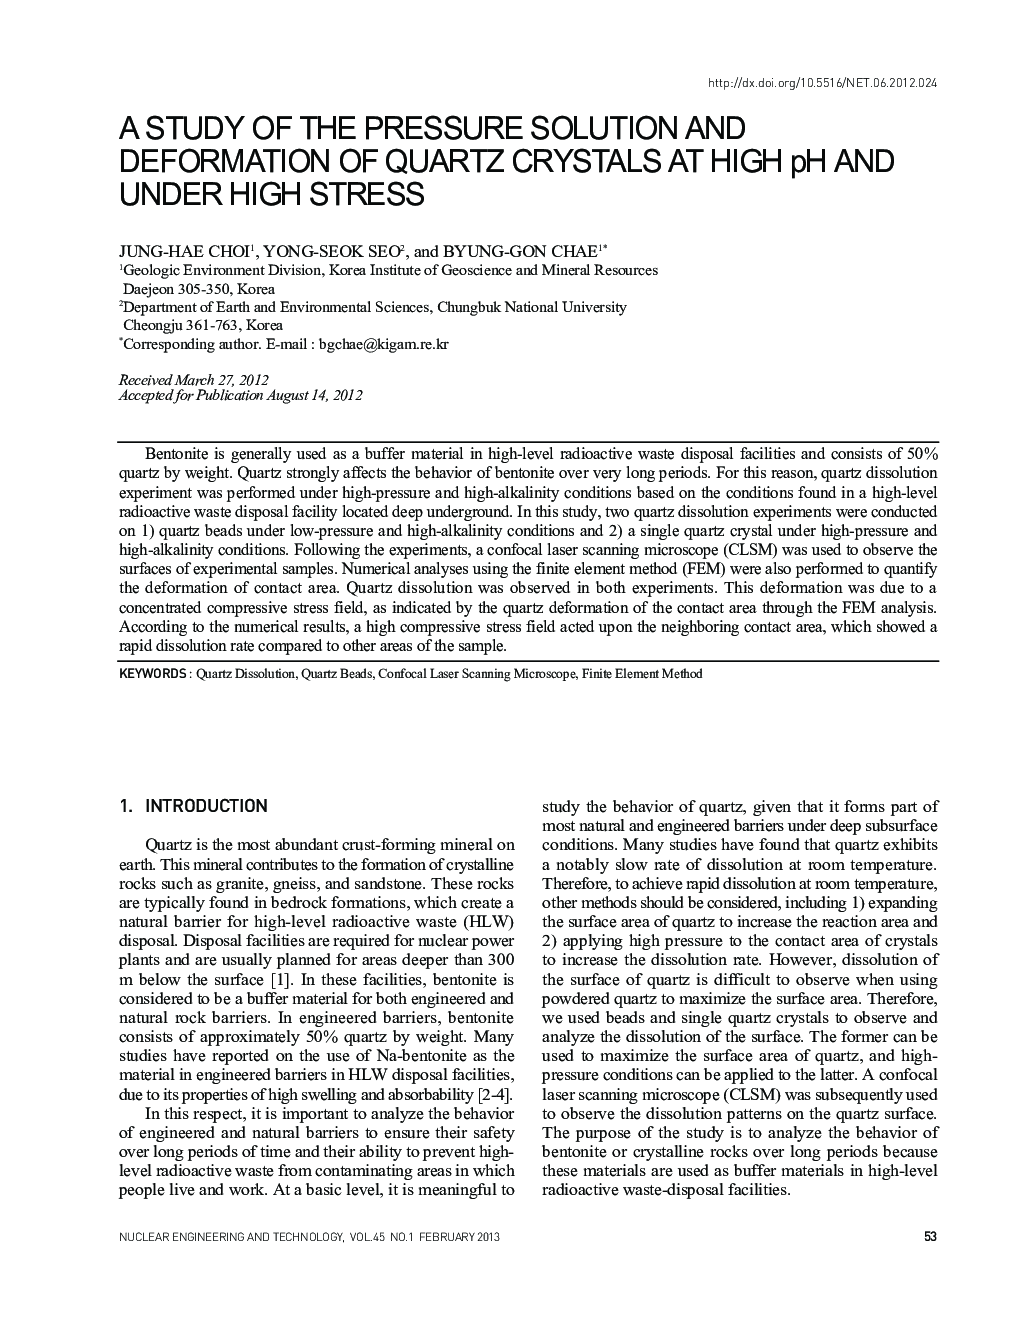 A STUDY OF THE PRESSURE SOLUTION AND DEFORMATION OF QUARTZ CRYSTALS AT HIGH pH AND UNDER HIGH STRESS